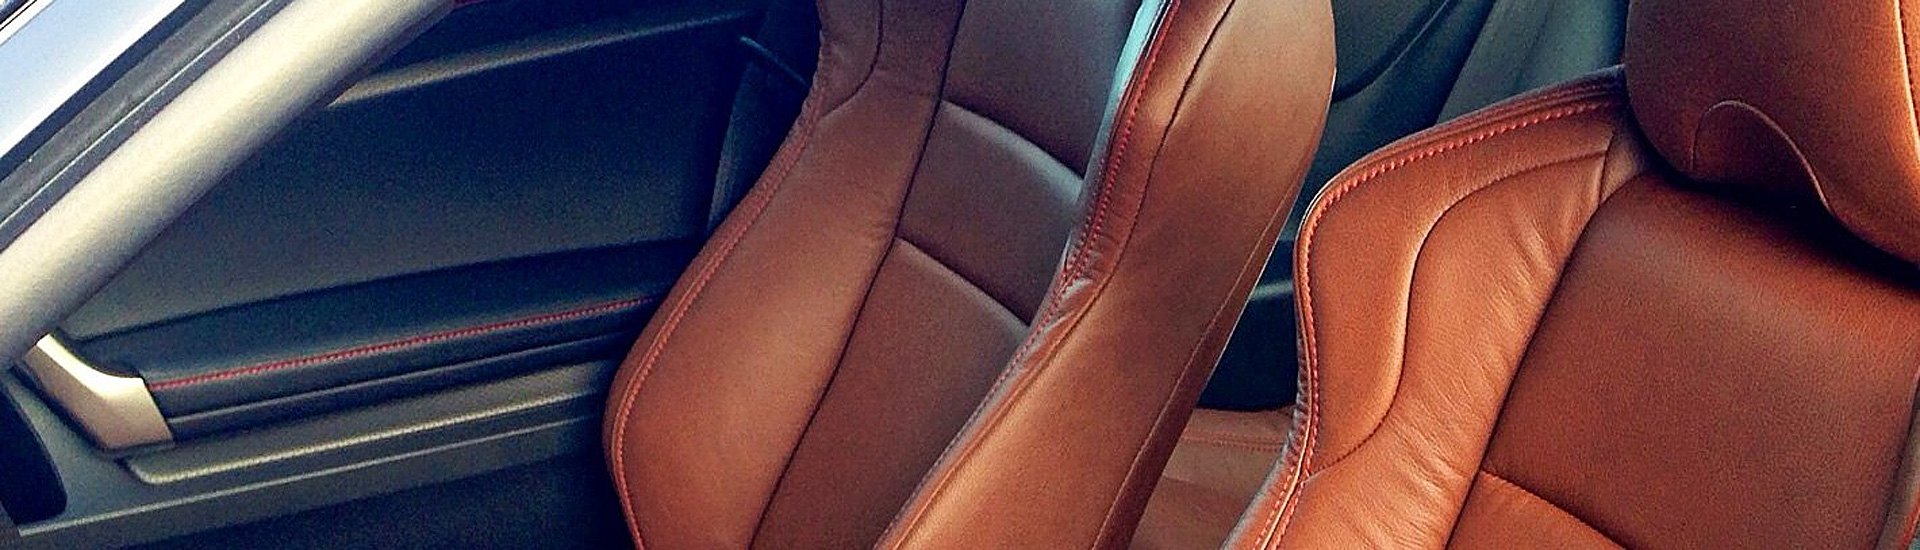 Leather Upholstery - Replace, Upgrade, Or Restore